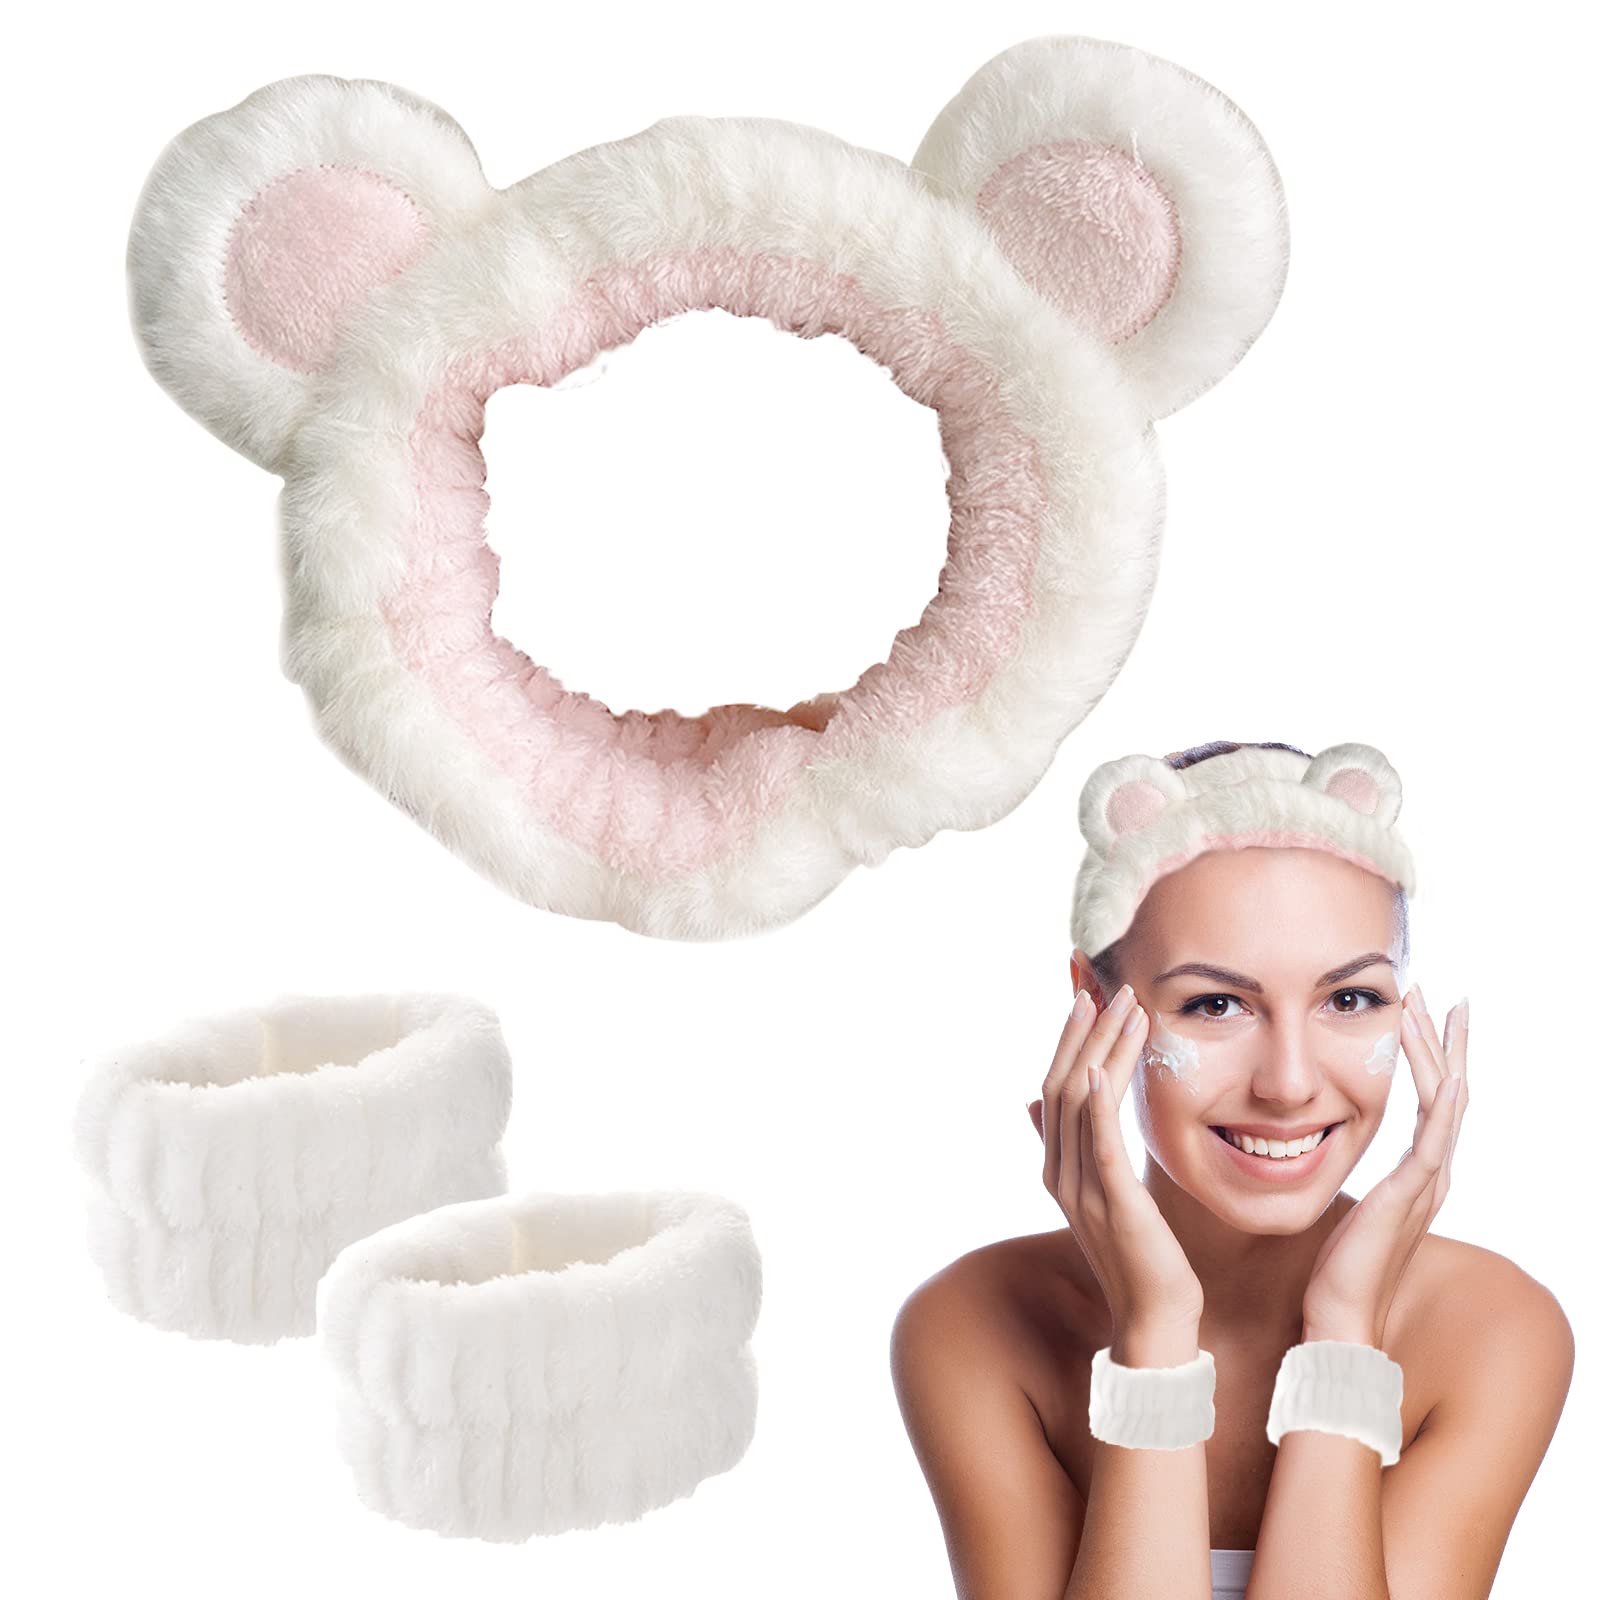 Headbands for Women Makeup Headband Spa Headband for Washing Face and  Matching Wristbands Skincare Headbands Hair Band Women Facial Makeup Head  Band Soft Fuzzy Head Wraps for Girls (White-Bear Ears)